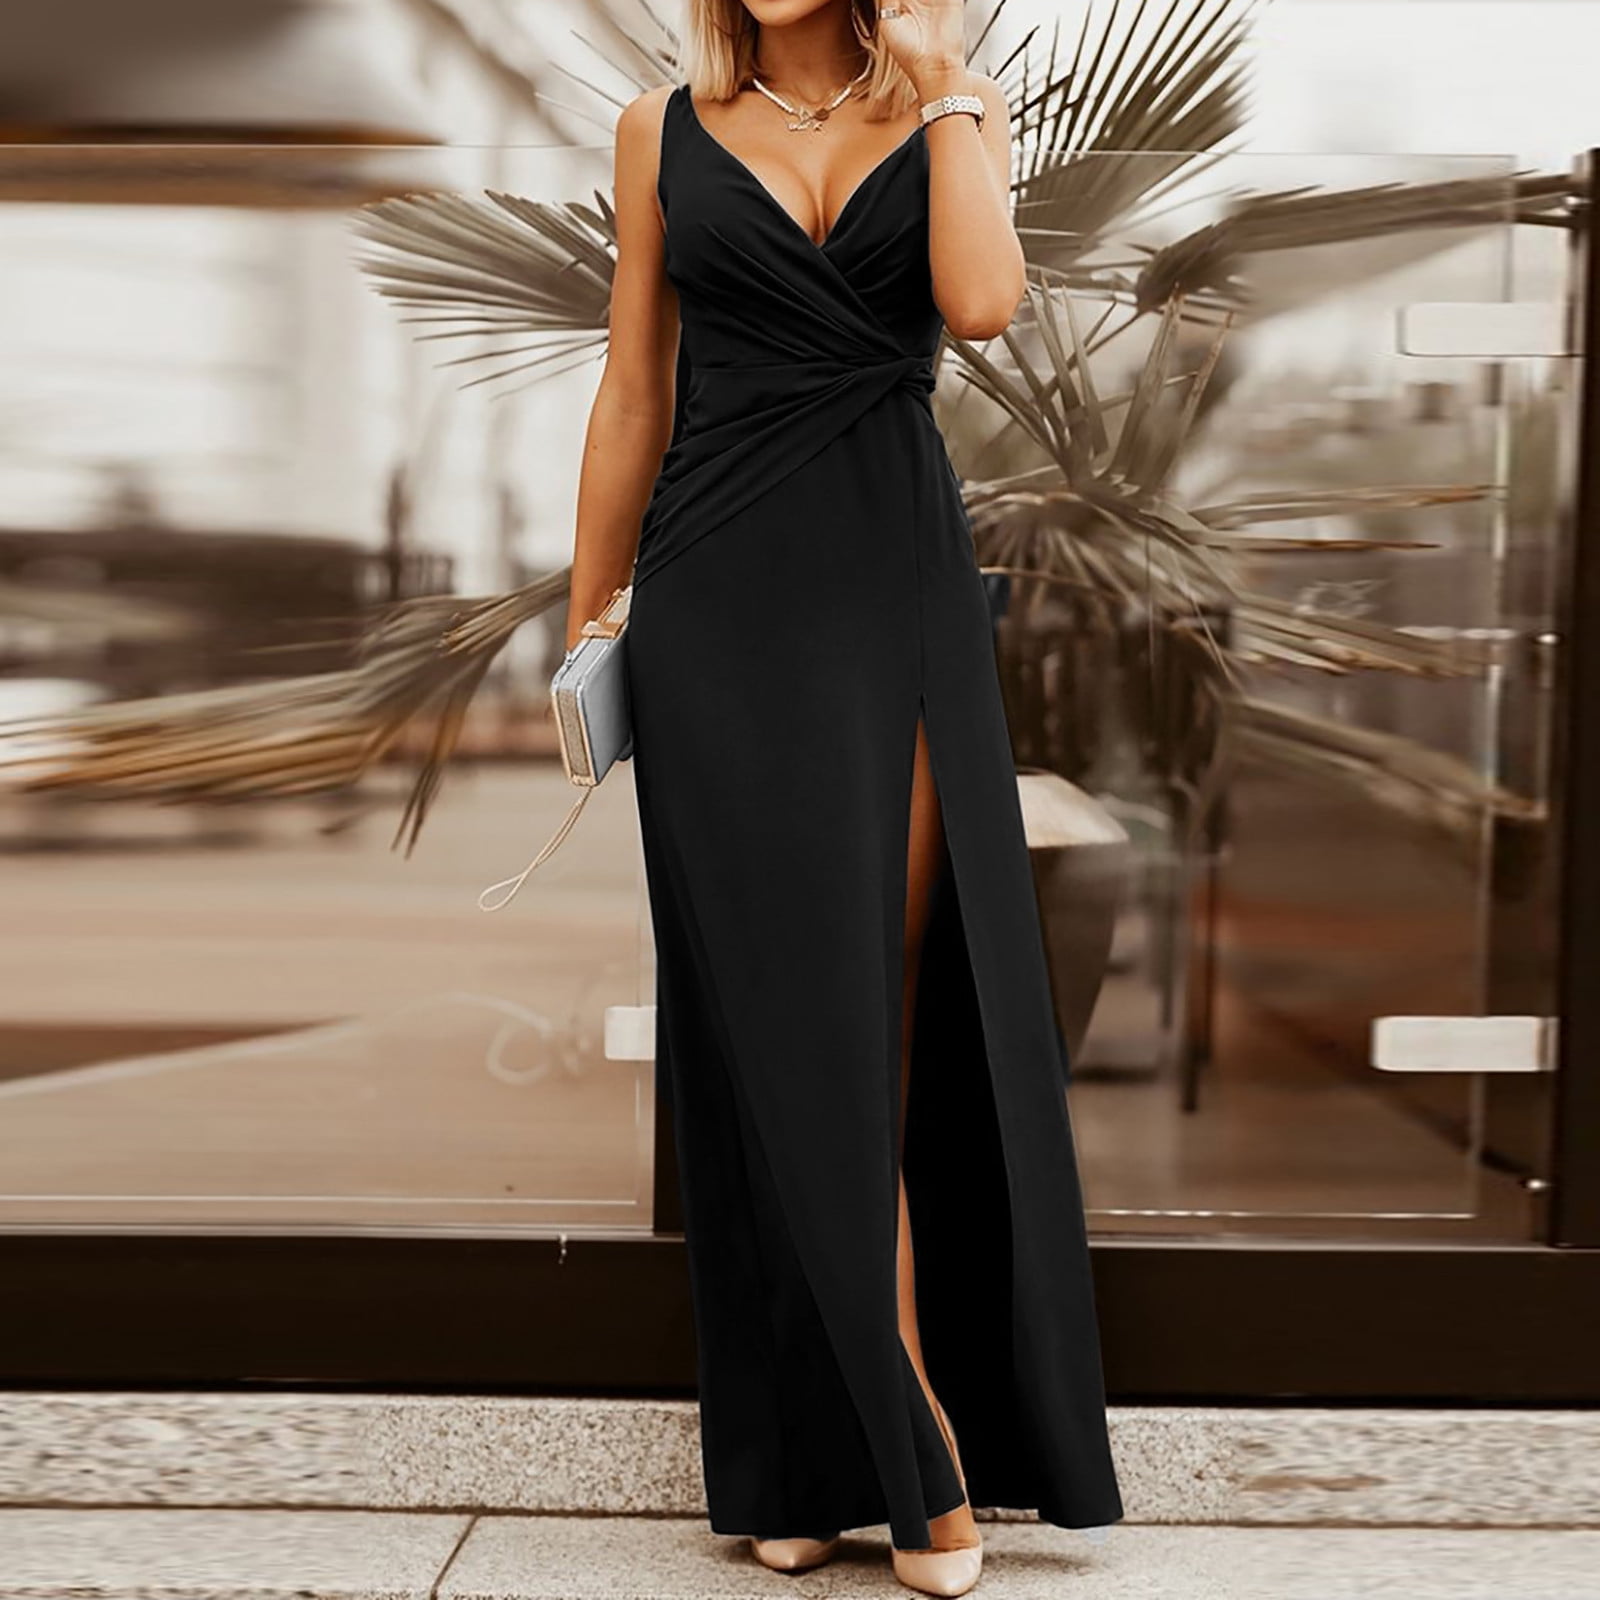 Shop for latest partywear gowns online